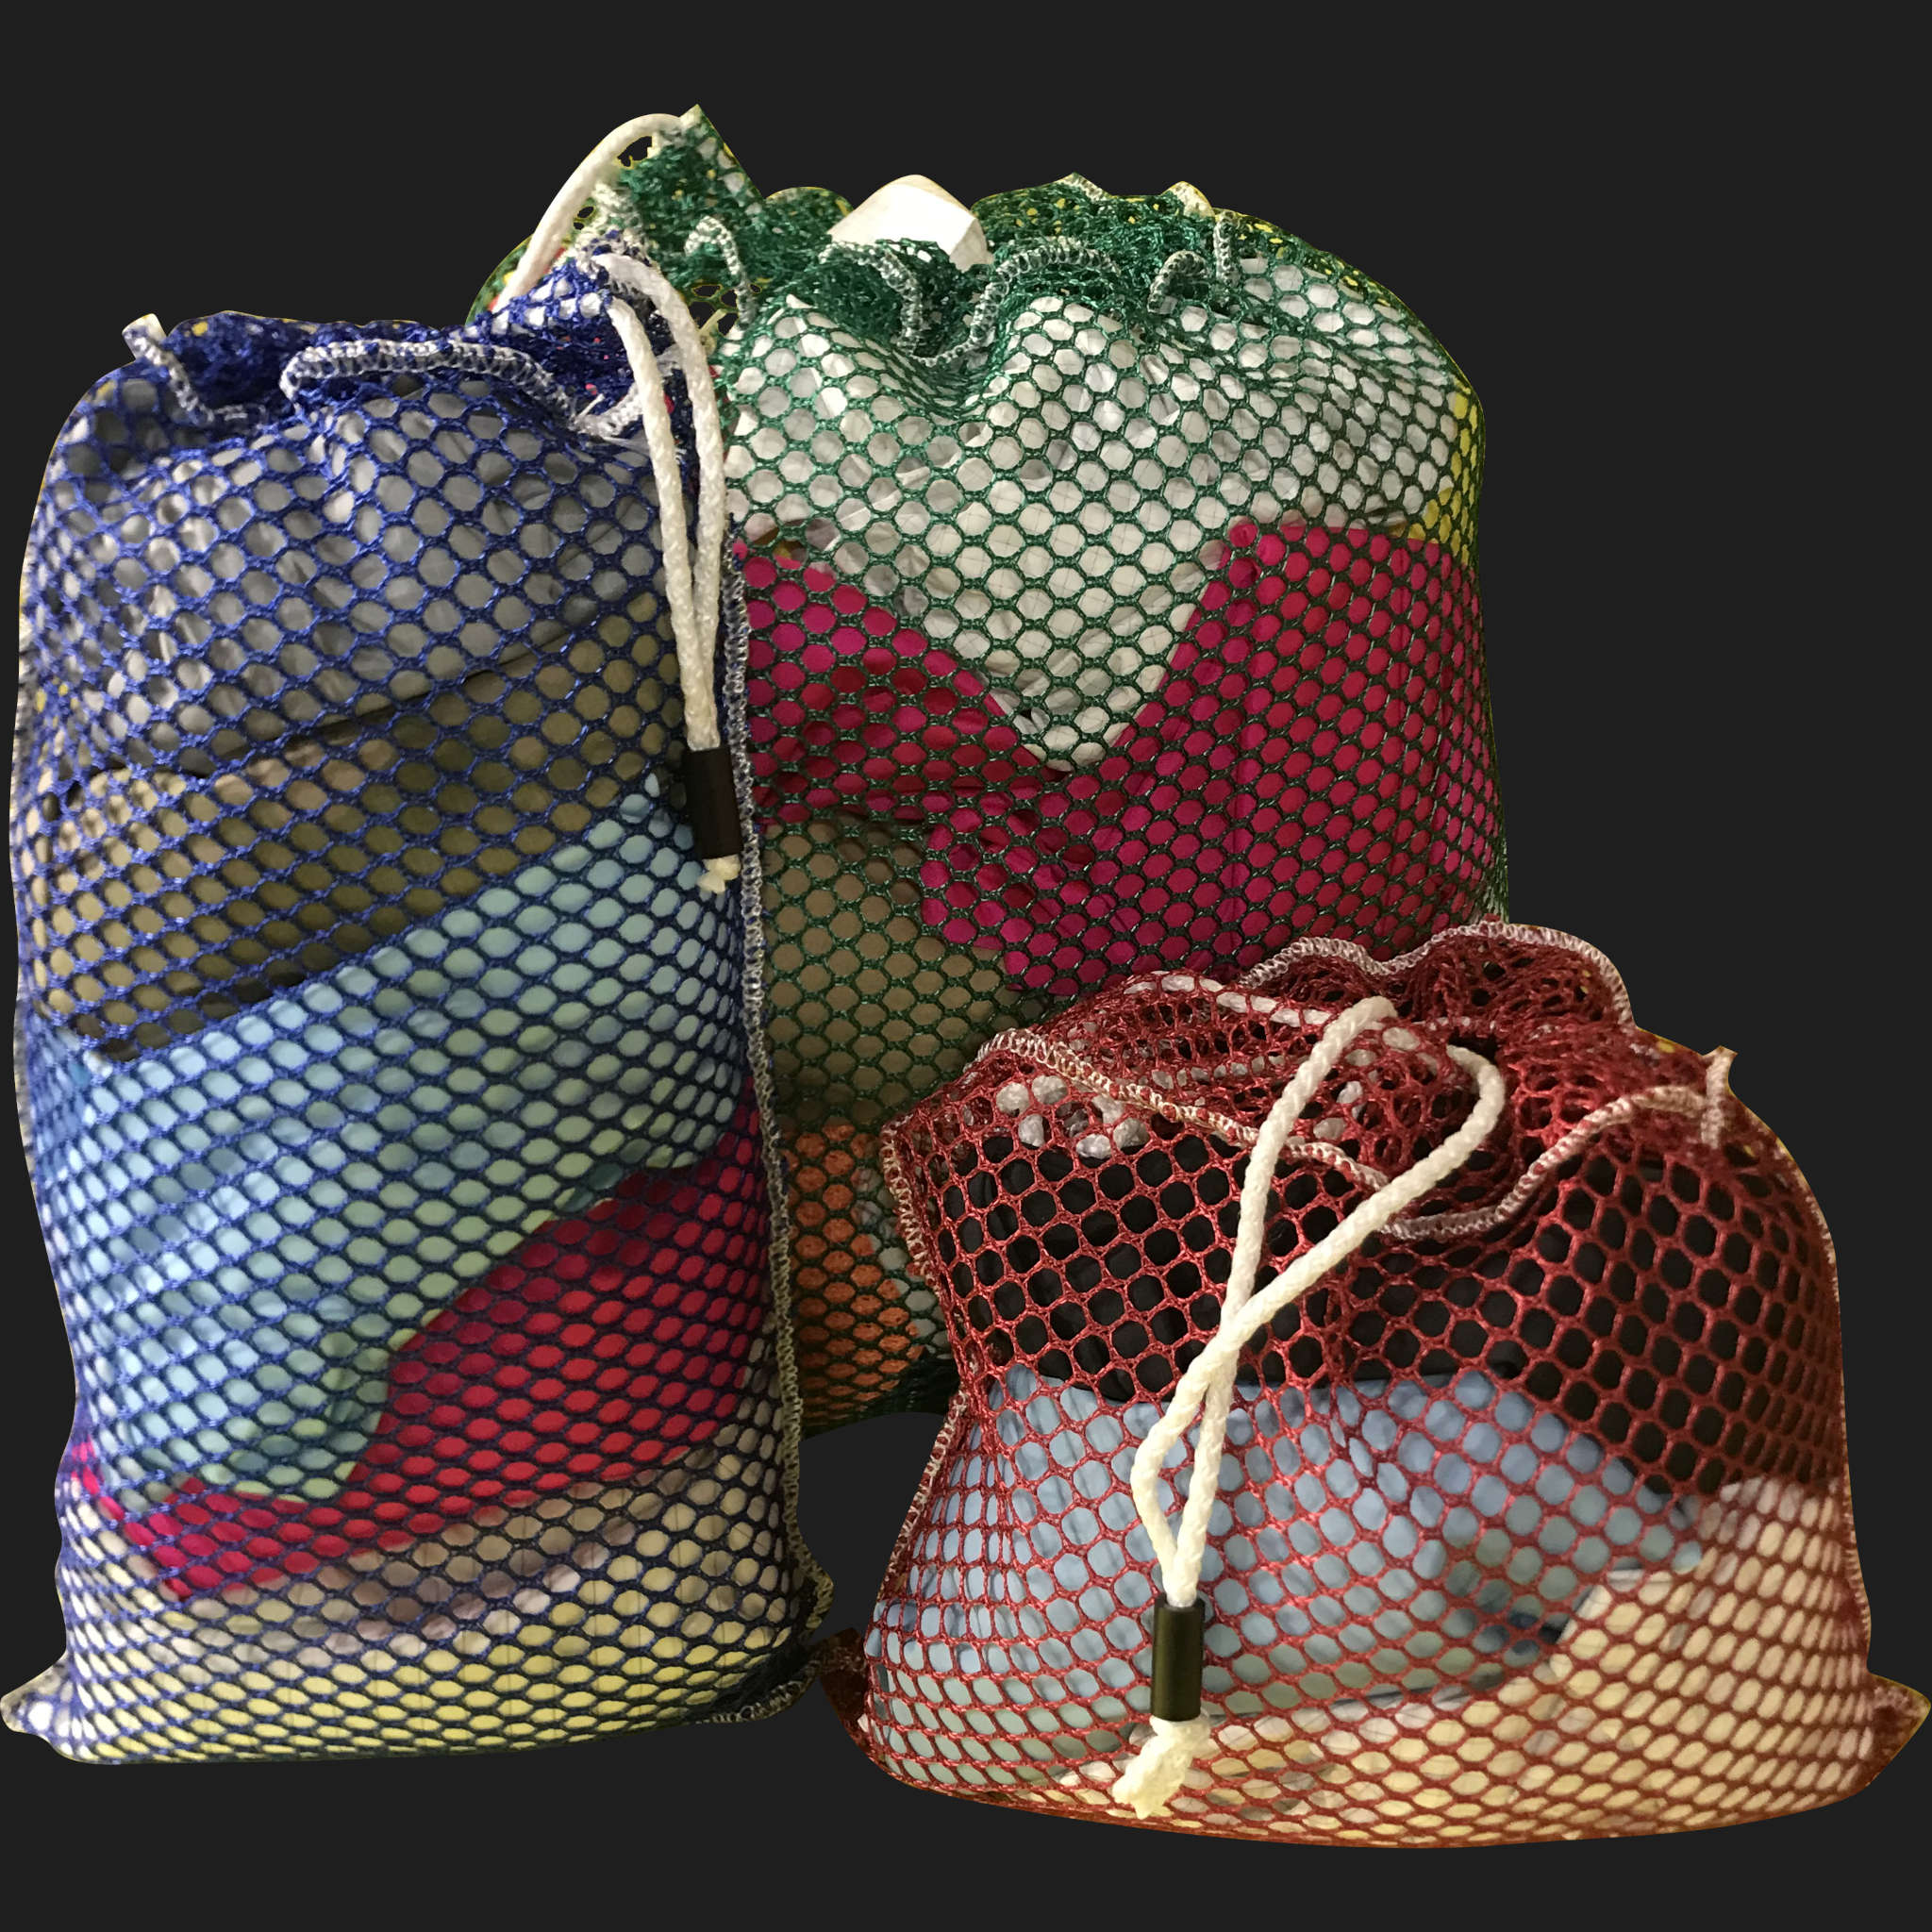 52" x 66" Customized Mesh-Net-Laundry Bags Heavy Duty with Cord and barrellock closure